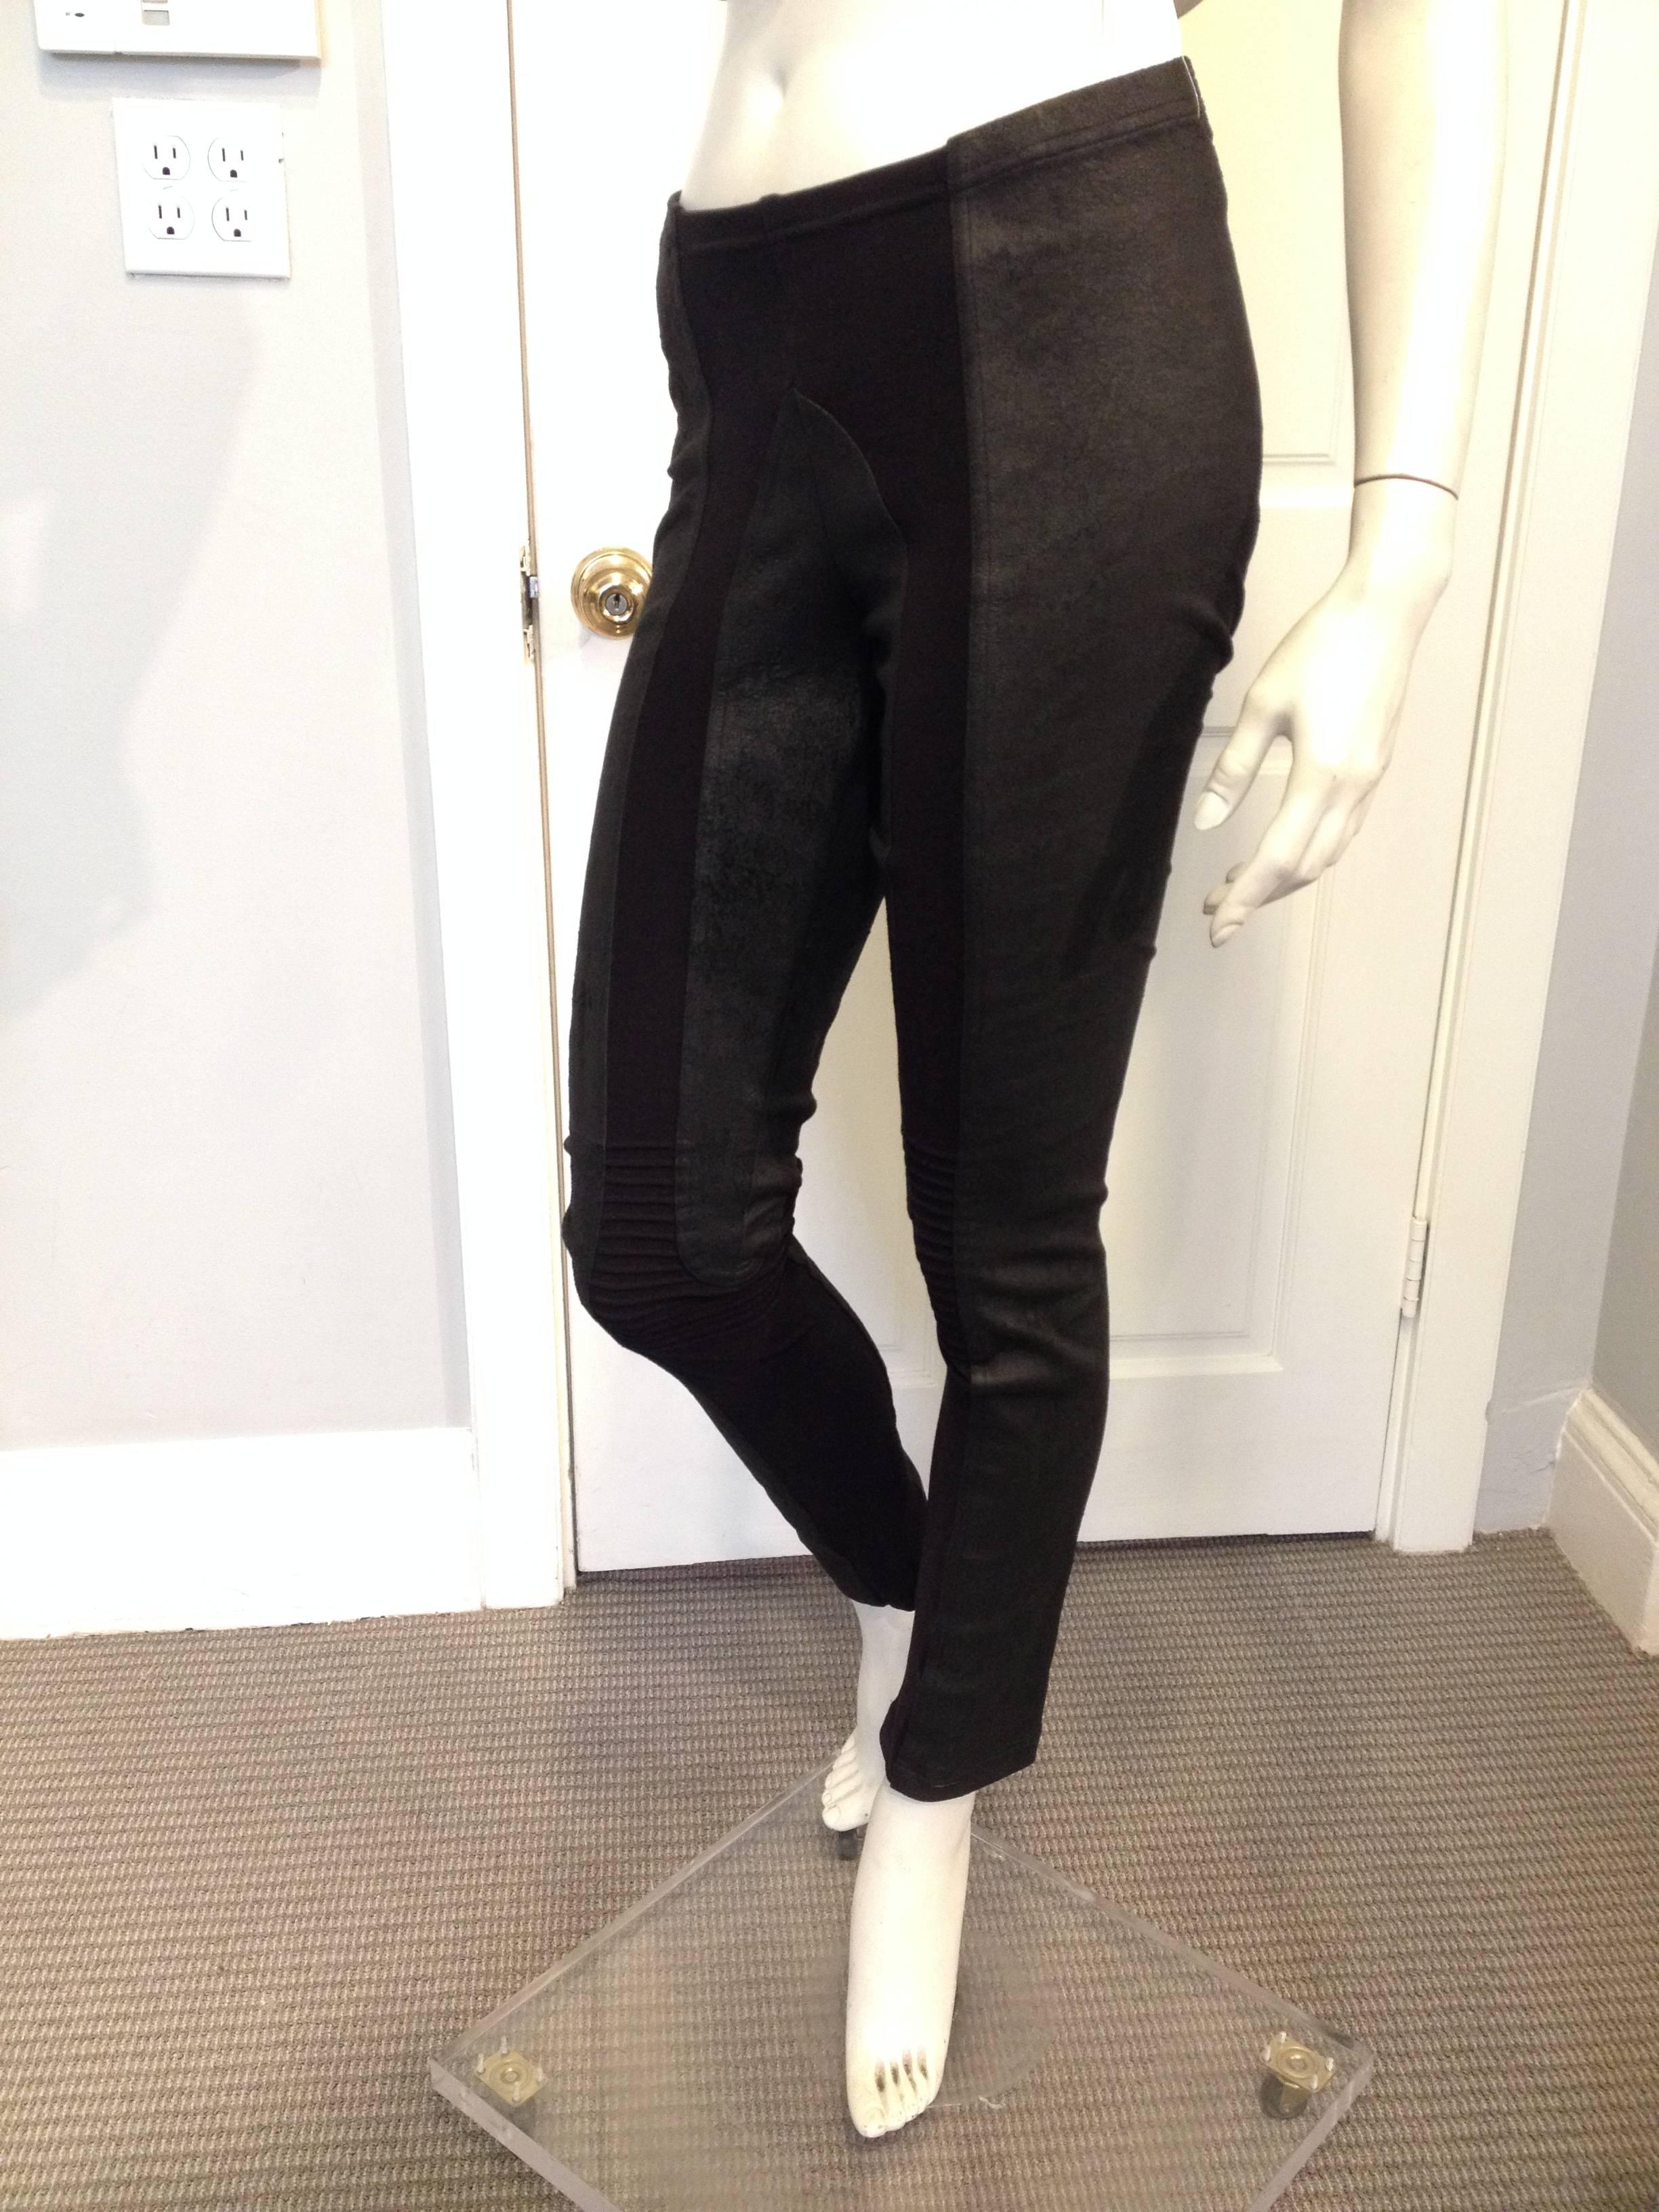 Slick and modern, these Rick Owens leggings are the perfect way to wear leather. The texture is ultra cool - it's soft and crackled, with a finish that's both shiny and matte at the same time. The piece is constructed from alternating panels of